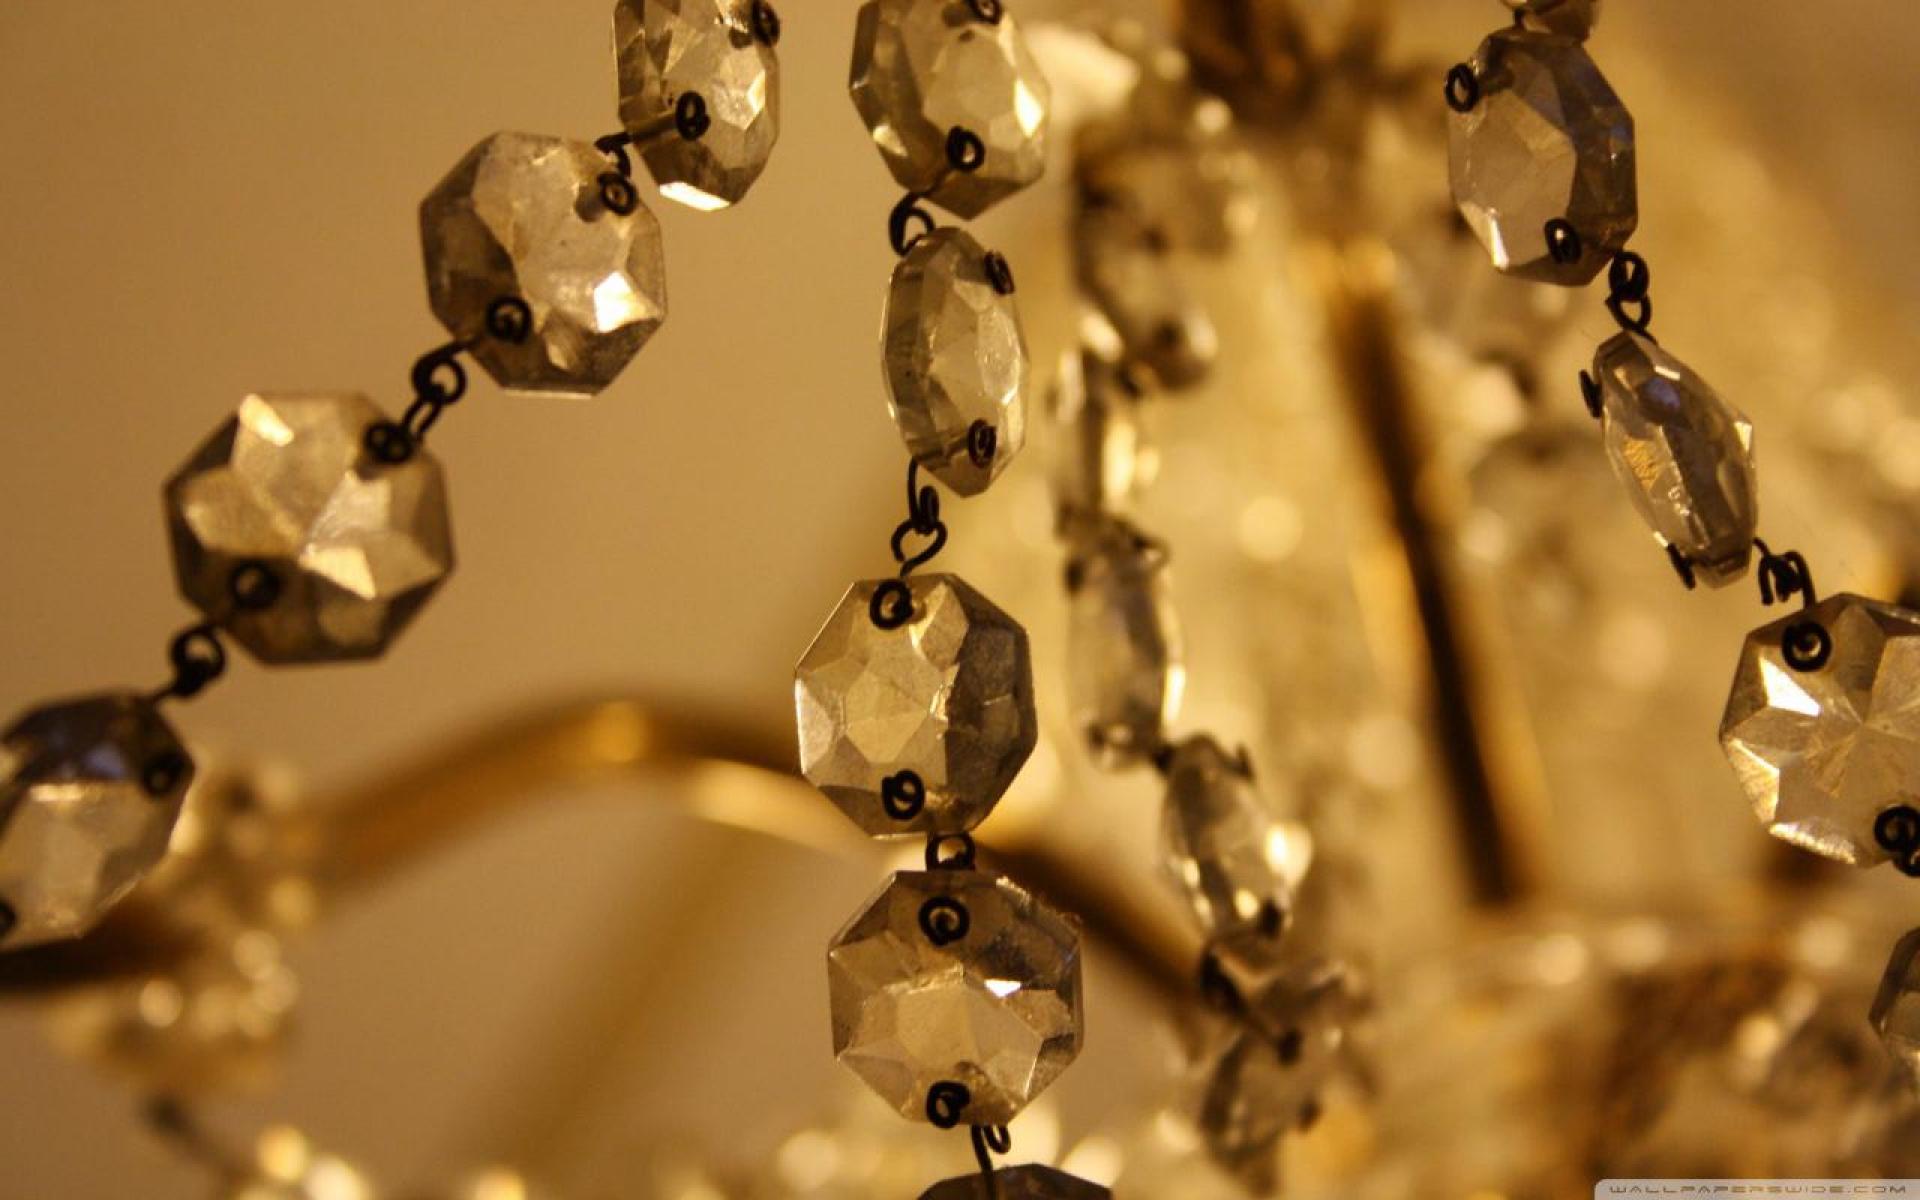 Crystal chandelier - (#102019) - High Quality and Resolution ...